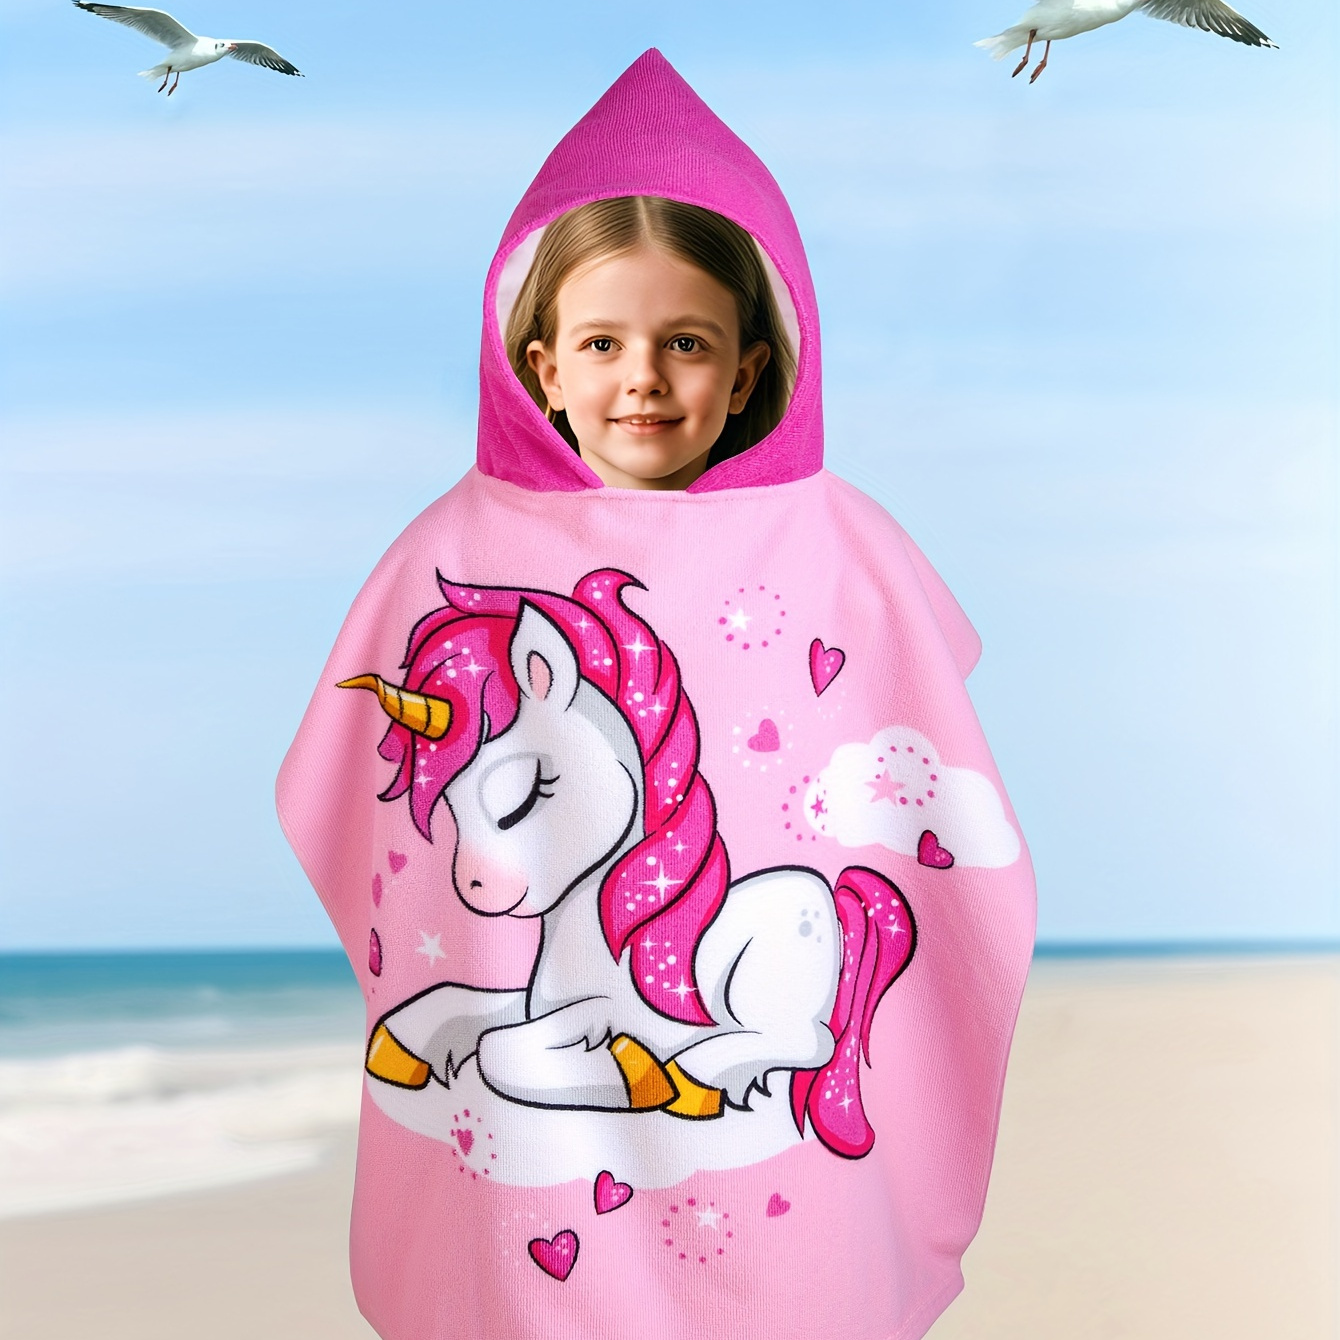 

Kids Hooded Beach Towel, Quick-dry Absorbent Towel Robe, 1-10 Years, Portable Travel Beach Cape For Sun Protection, Perfect For Beach, Park Play, Ideal Summer Gift For Children